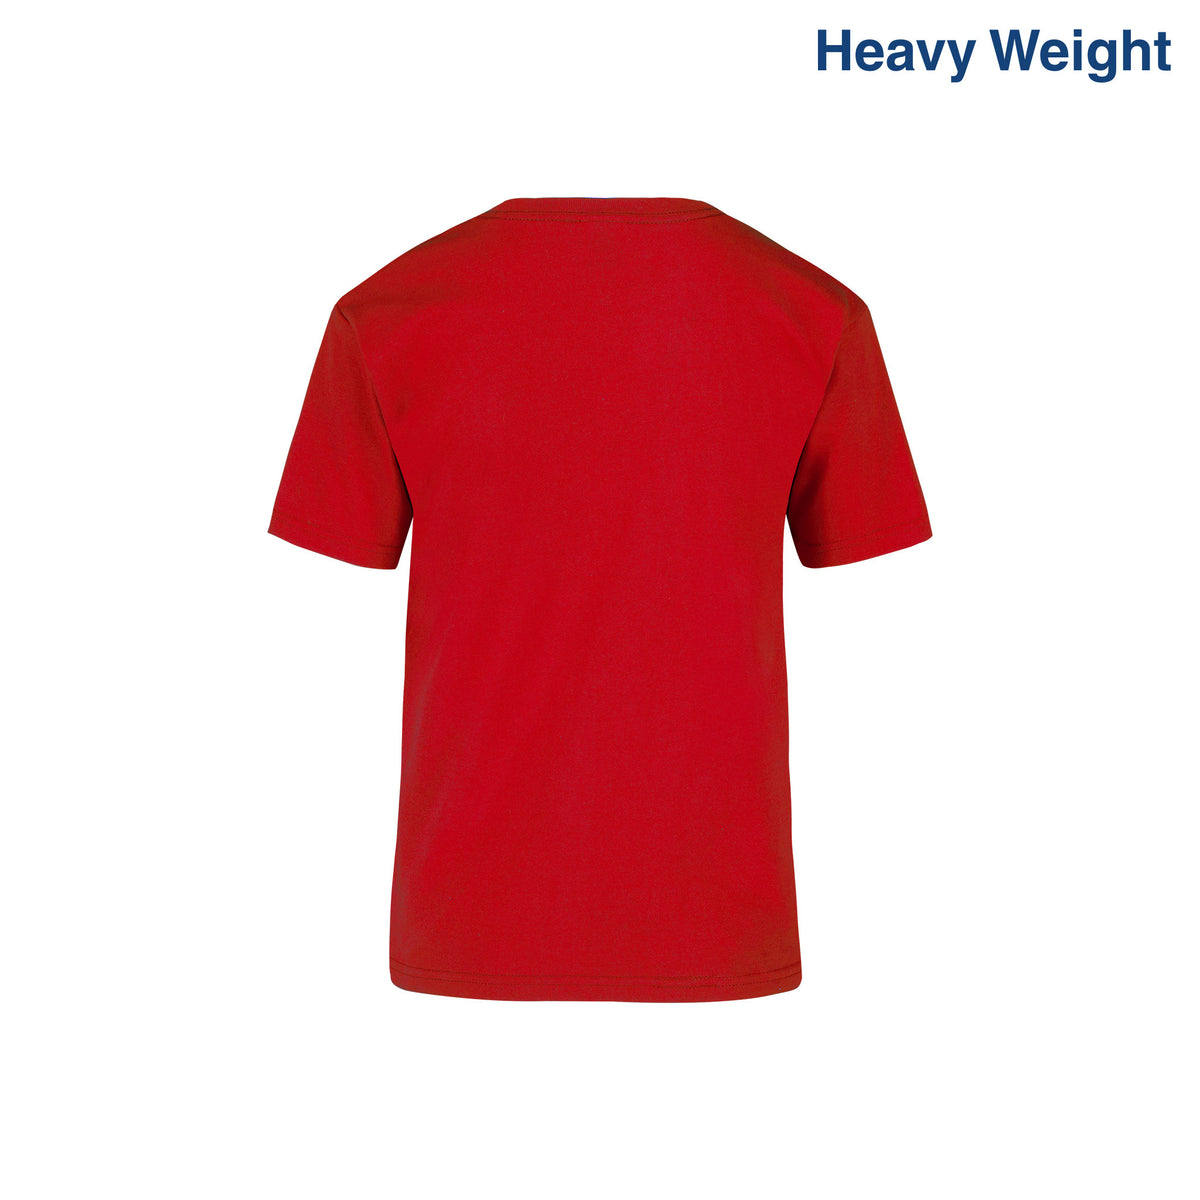 Youth’s Heavy Weight Crew Neck Short Sleeve T-Shirt (Red) – Yazbek USA Mint